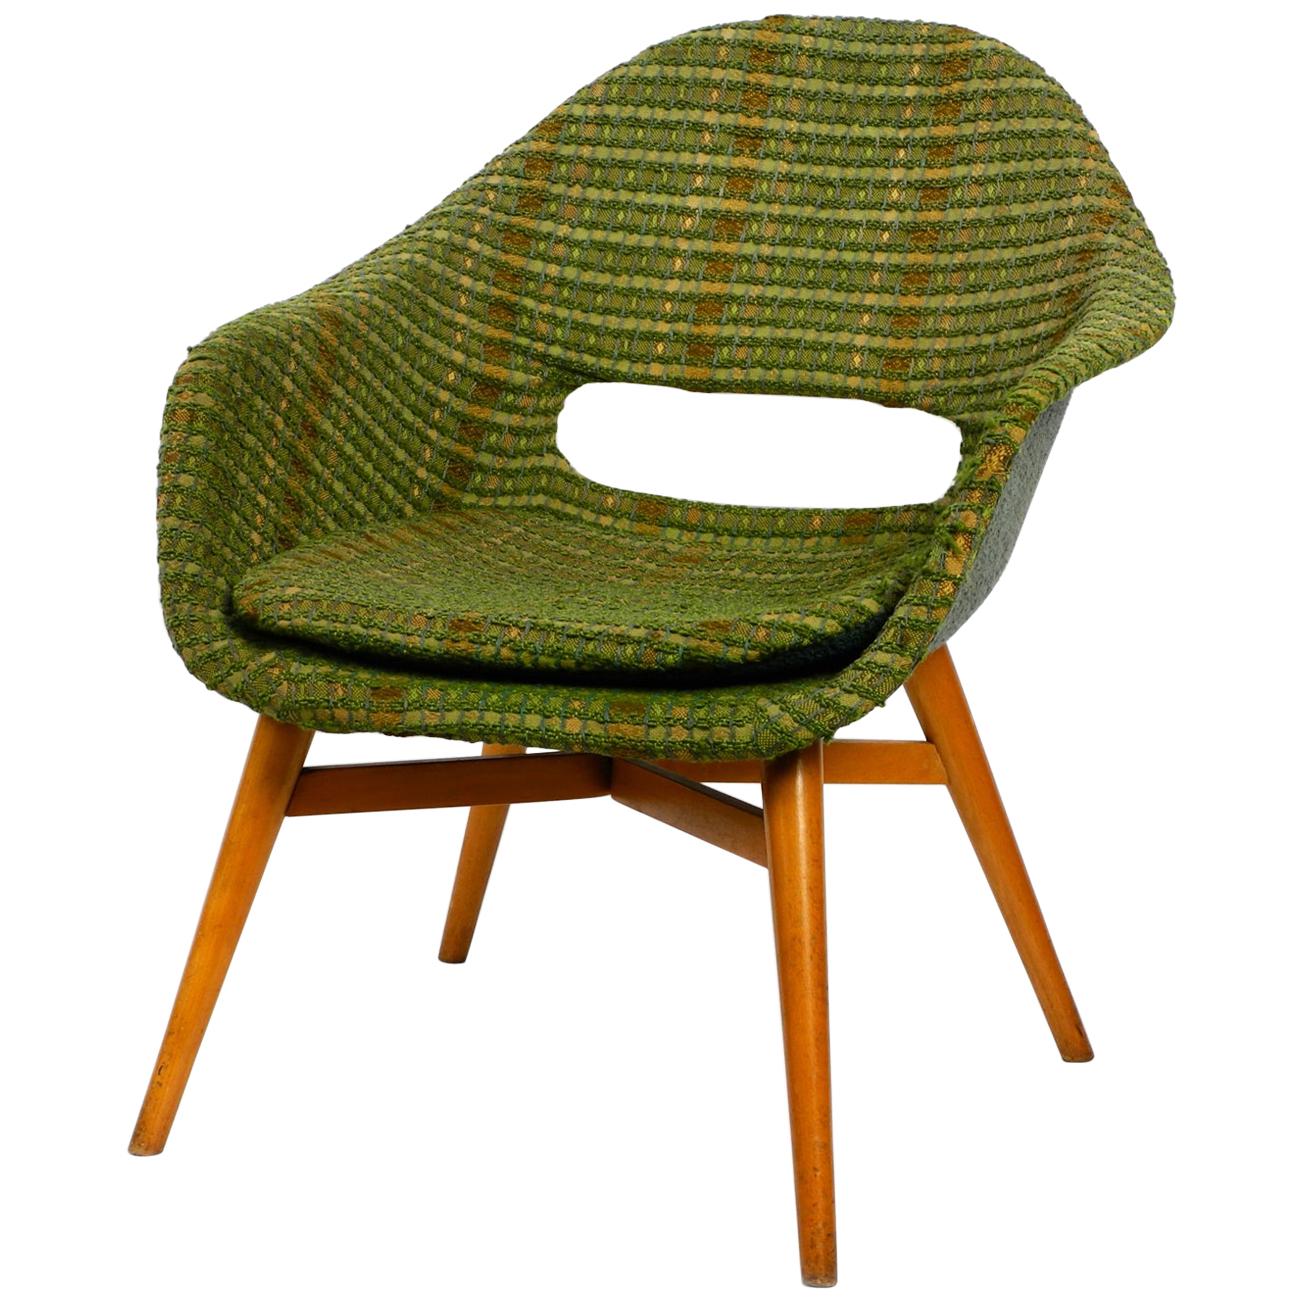 1960s Lounge Chair by Miroslav Navratil with Fiberglass Shell and Original Cover